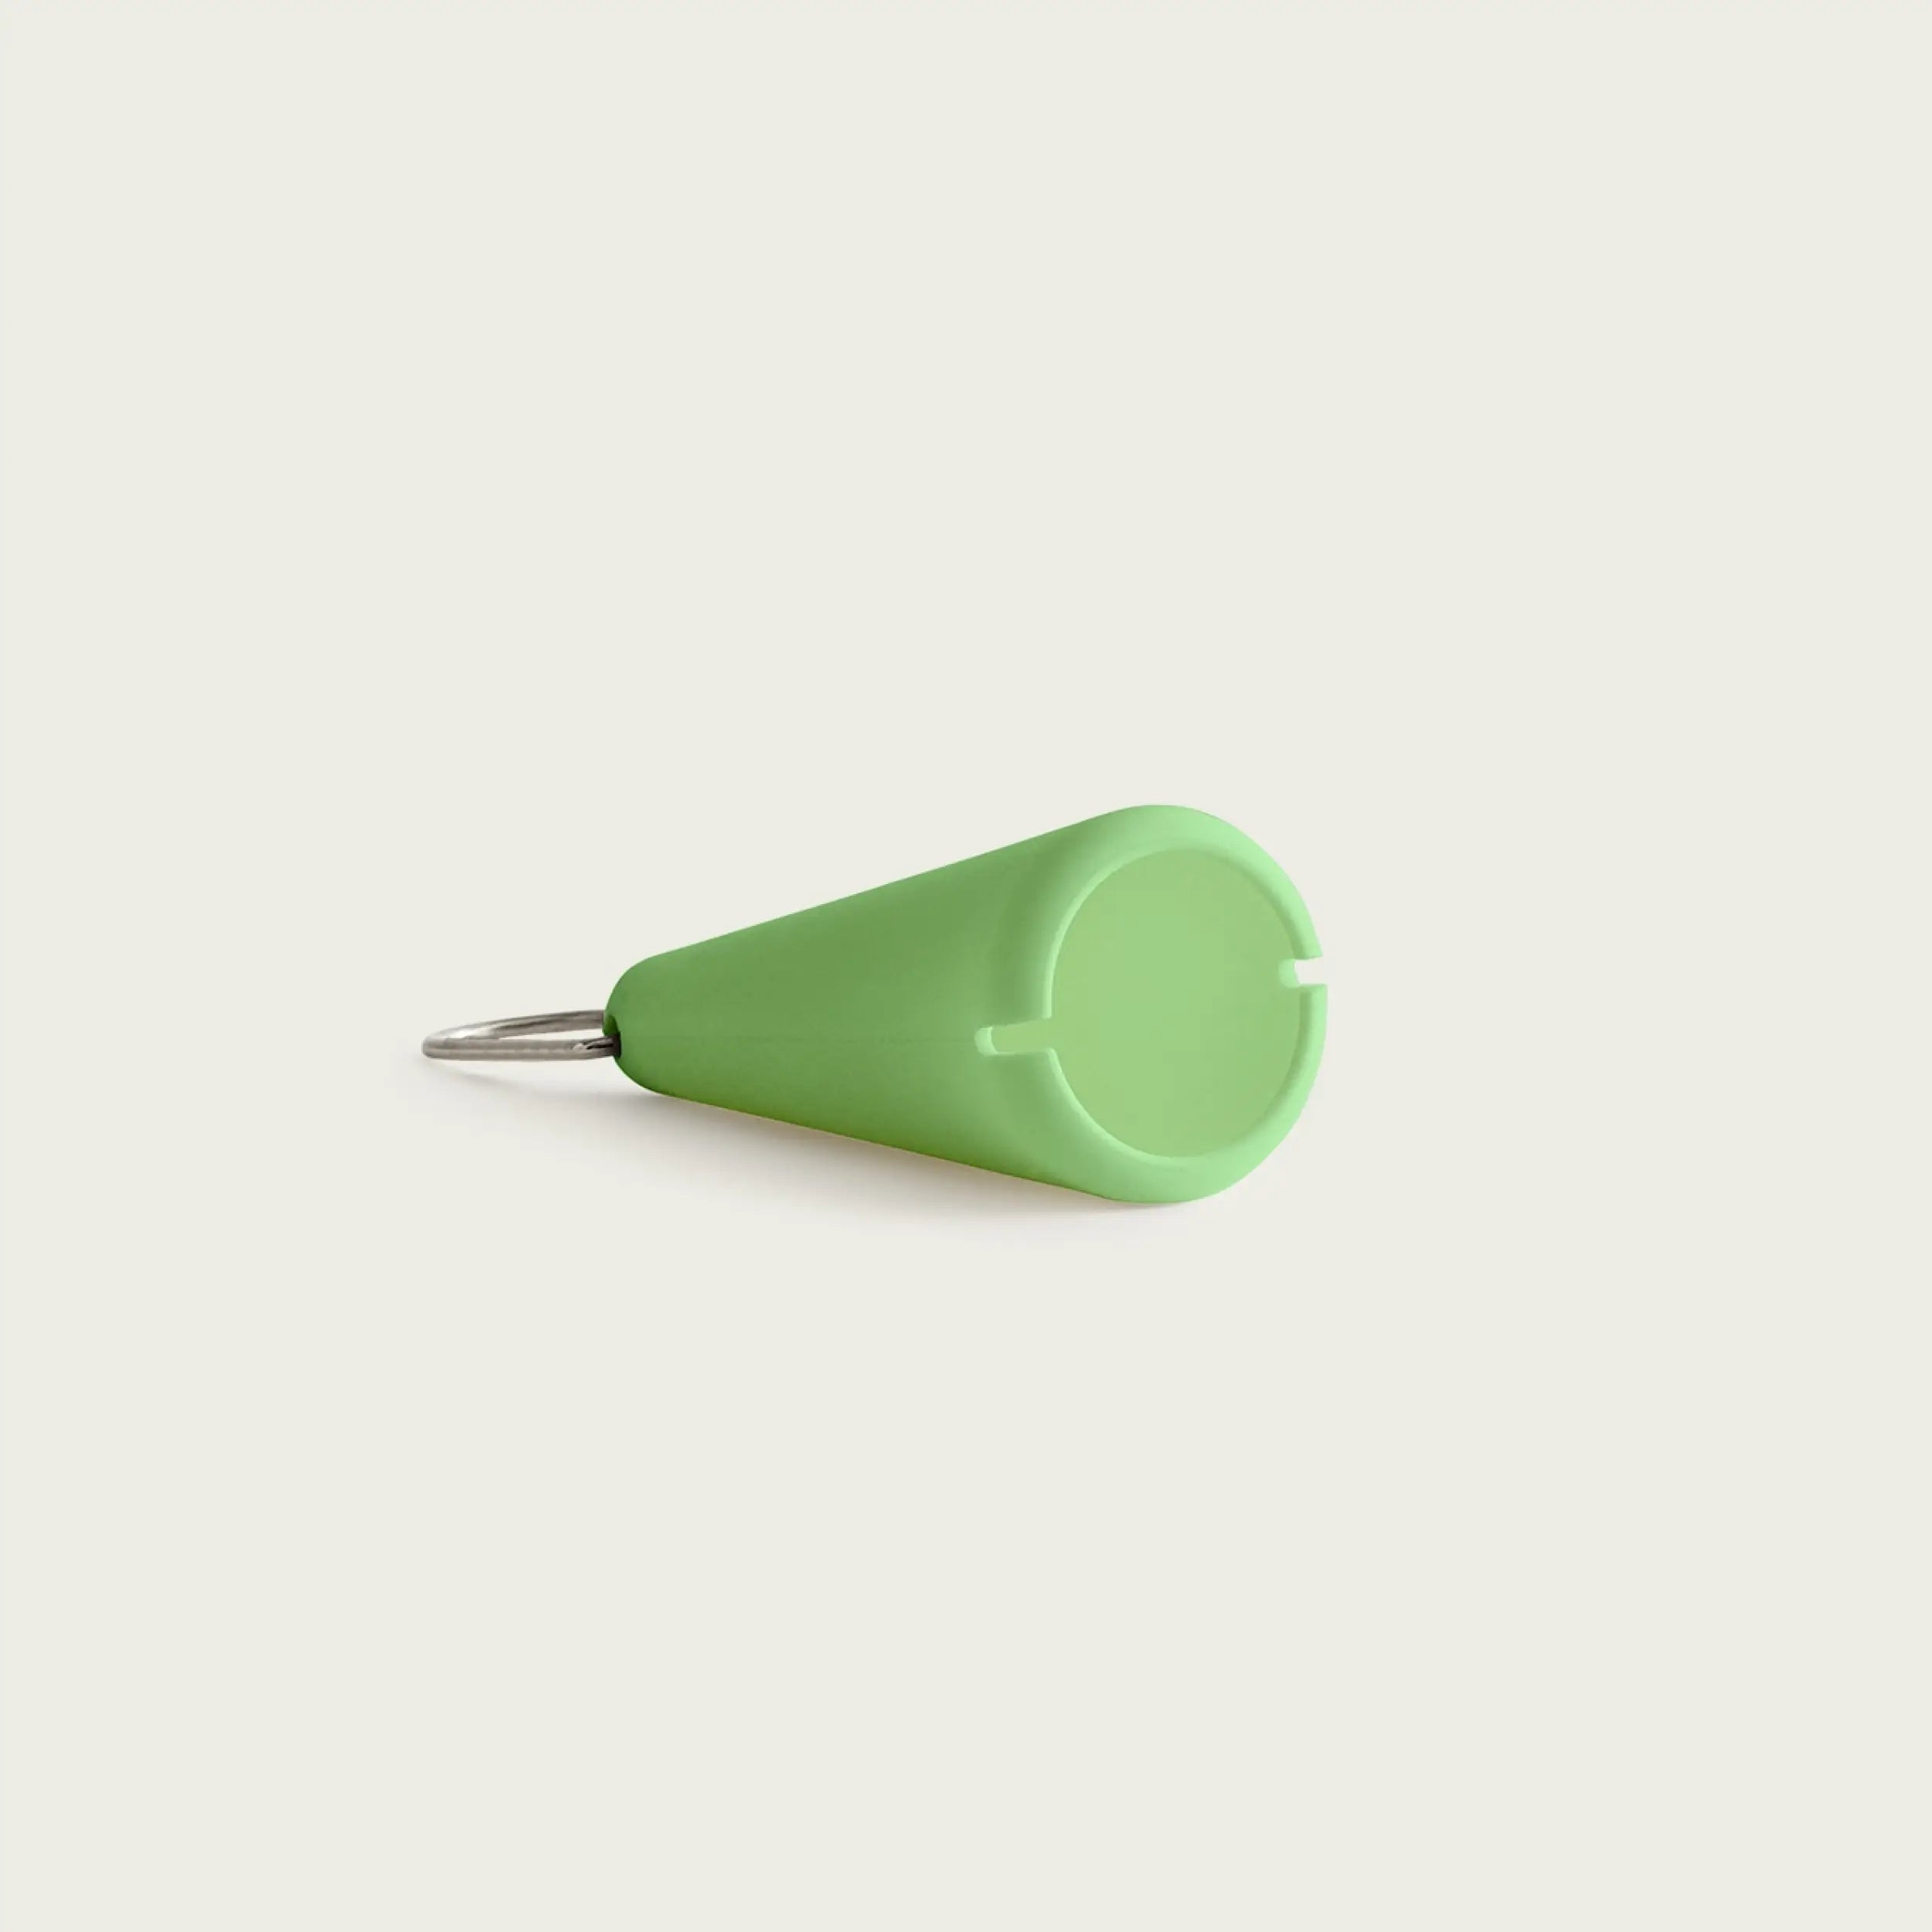 https://cdn.shopify.com/s/files/1/0017/7009/4690/files/session-goods-product-pipe-silicone-sleeve-celery-green-02.webp?crop=center&height=2500&v=1696211656&width=2500